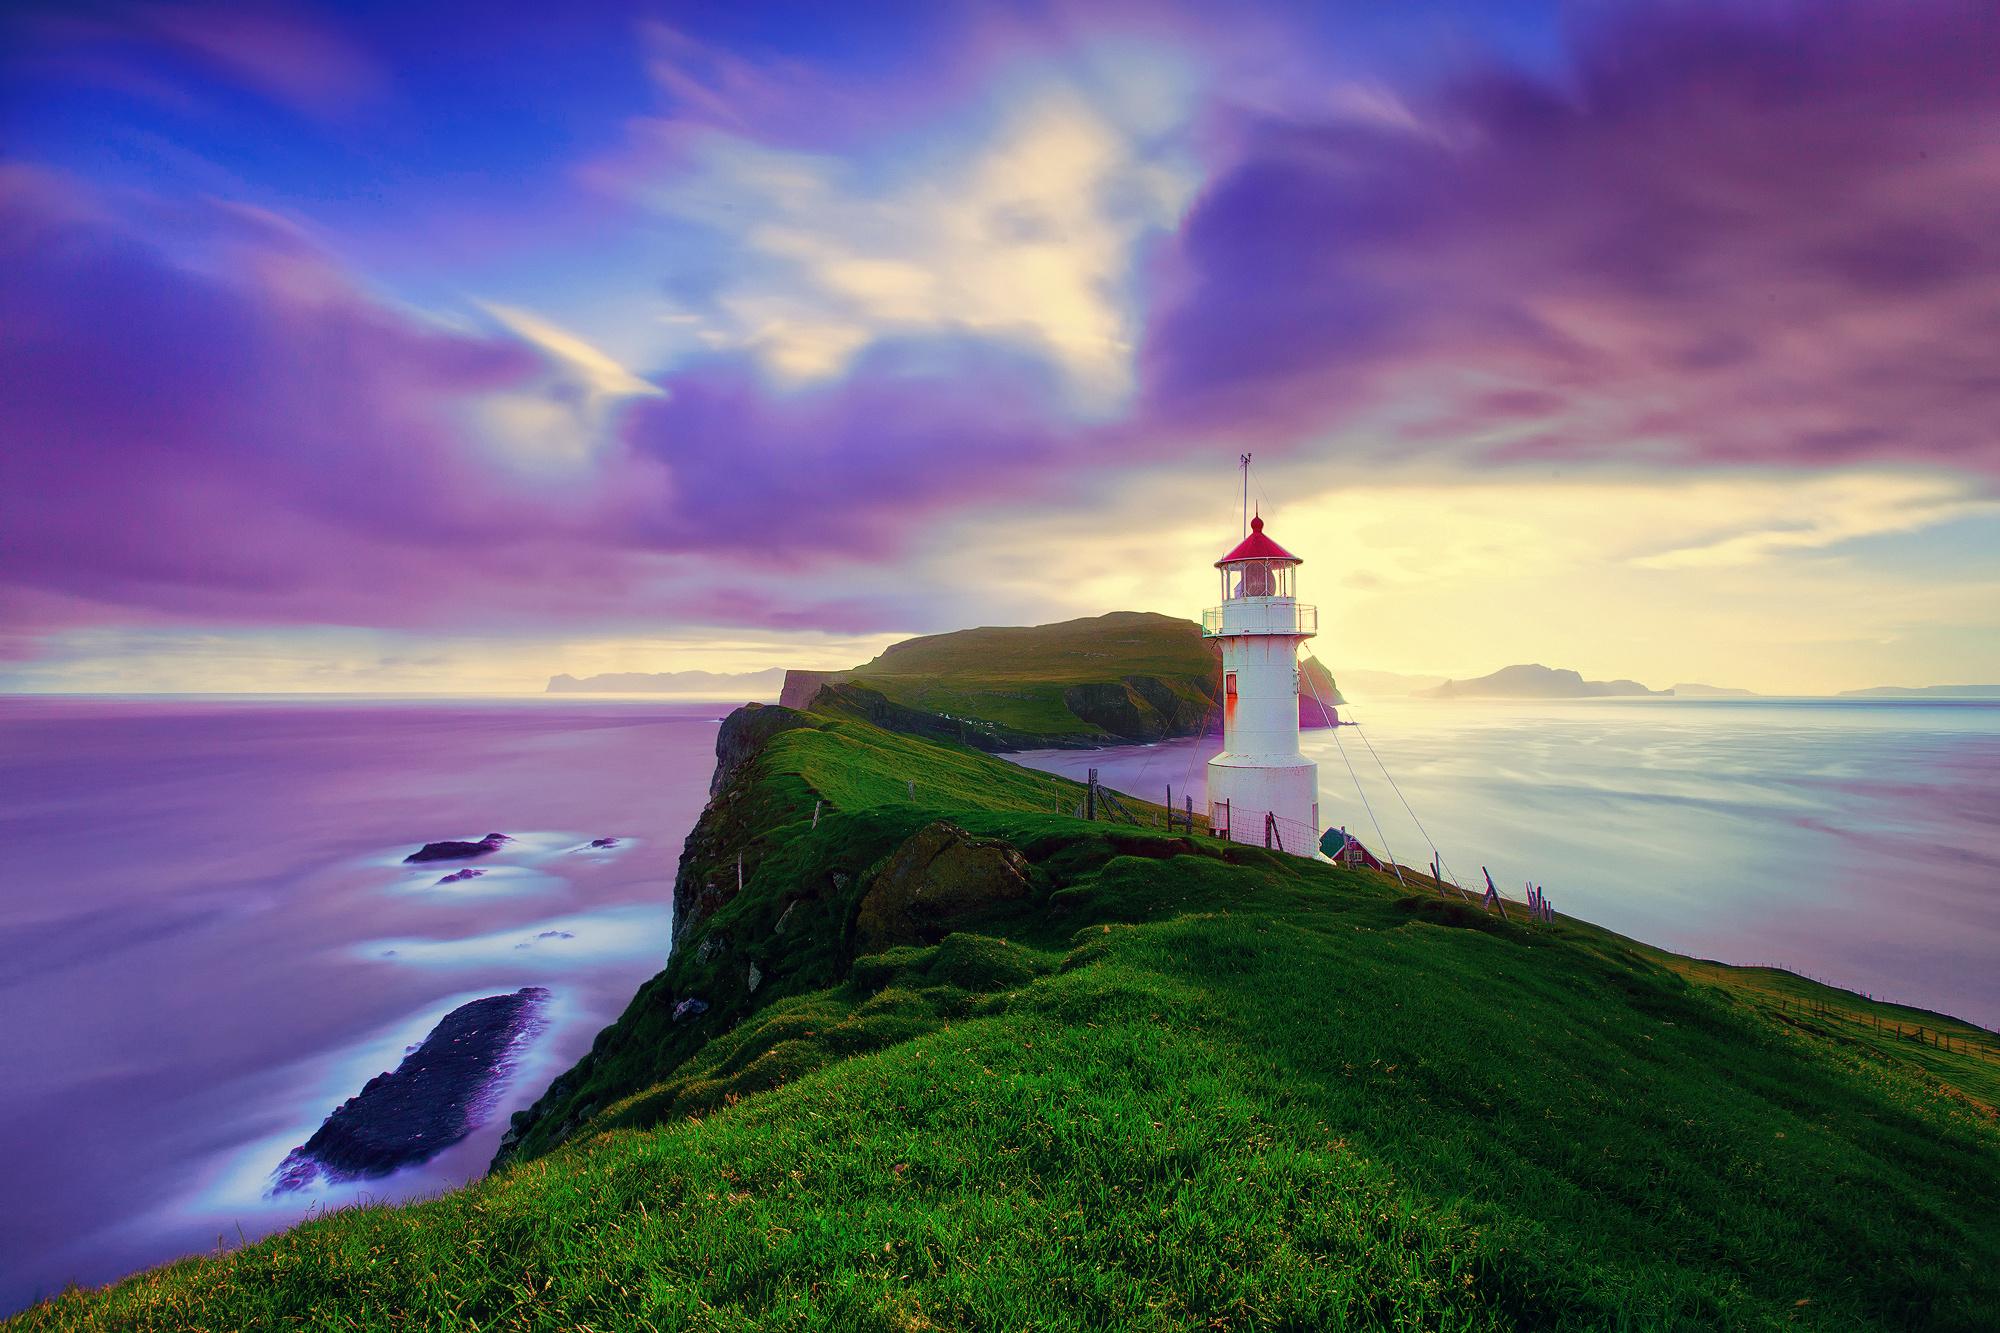 Lighthouse Pictures & Wallpapers • TrumpWallpapers